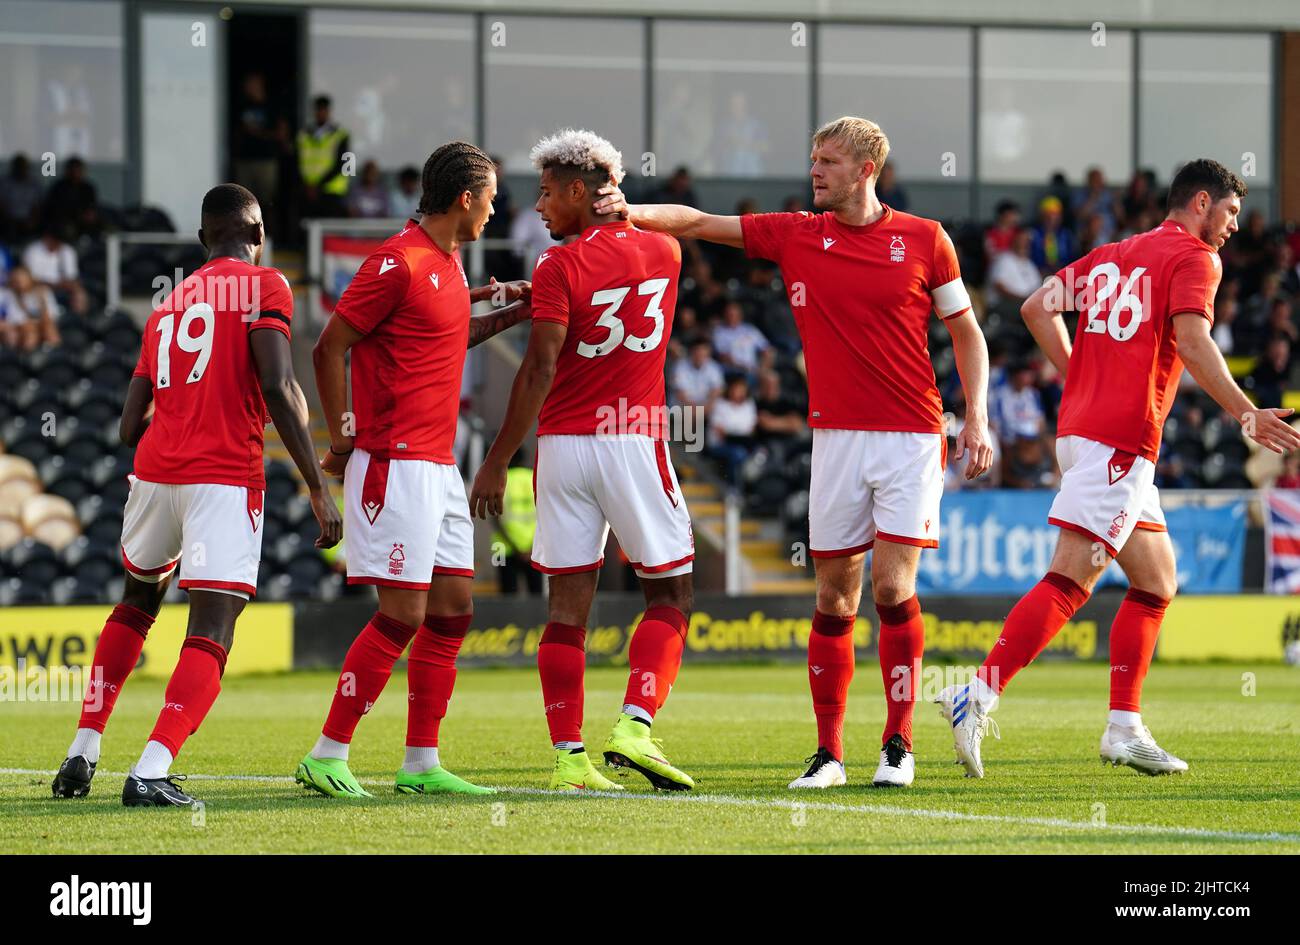 Nottingham Forest's Lyle Taylor (centre) celebrates scoring during a pre-season friendly match at the Pirelli Stadium, Burton upon Trent. Picture date: Wednesday July 20, 2022. Stock Photo